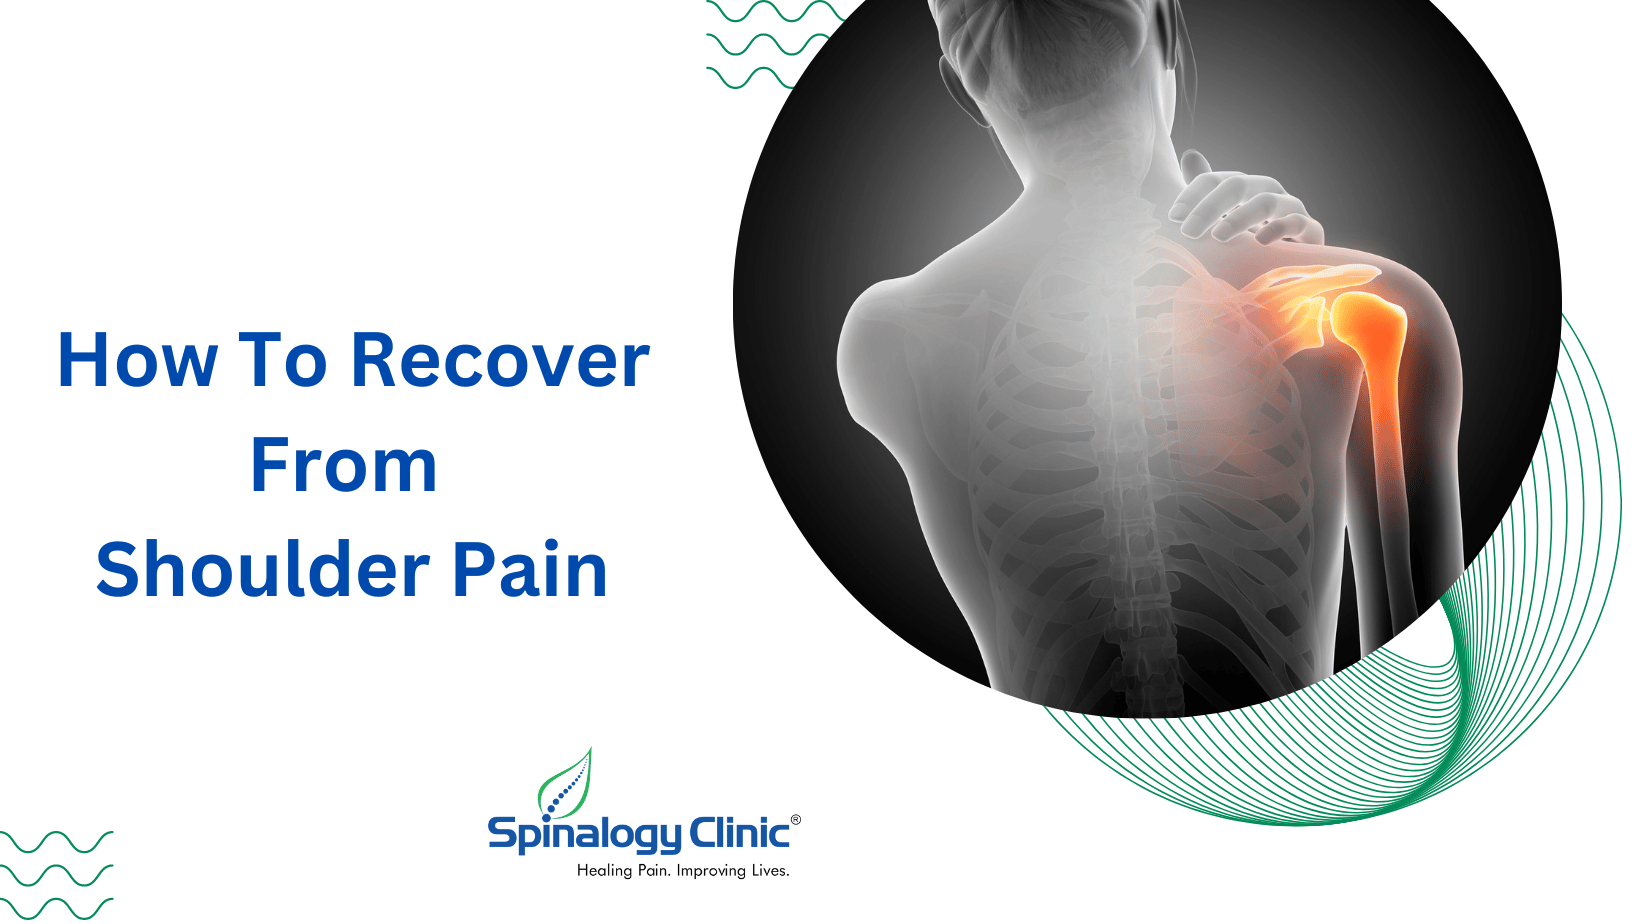 How To Recover From Shoulder Pain